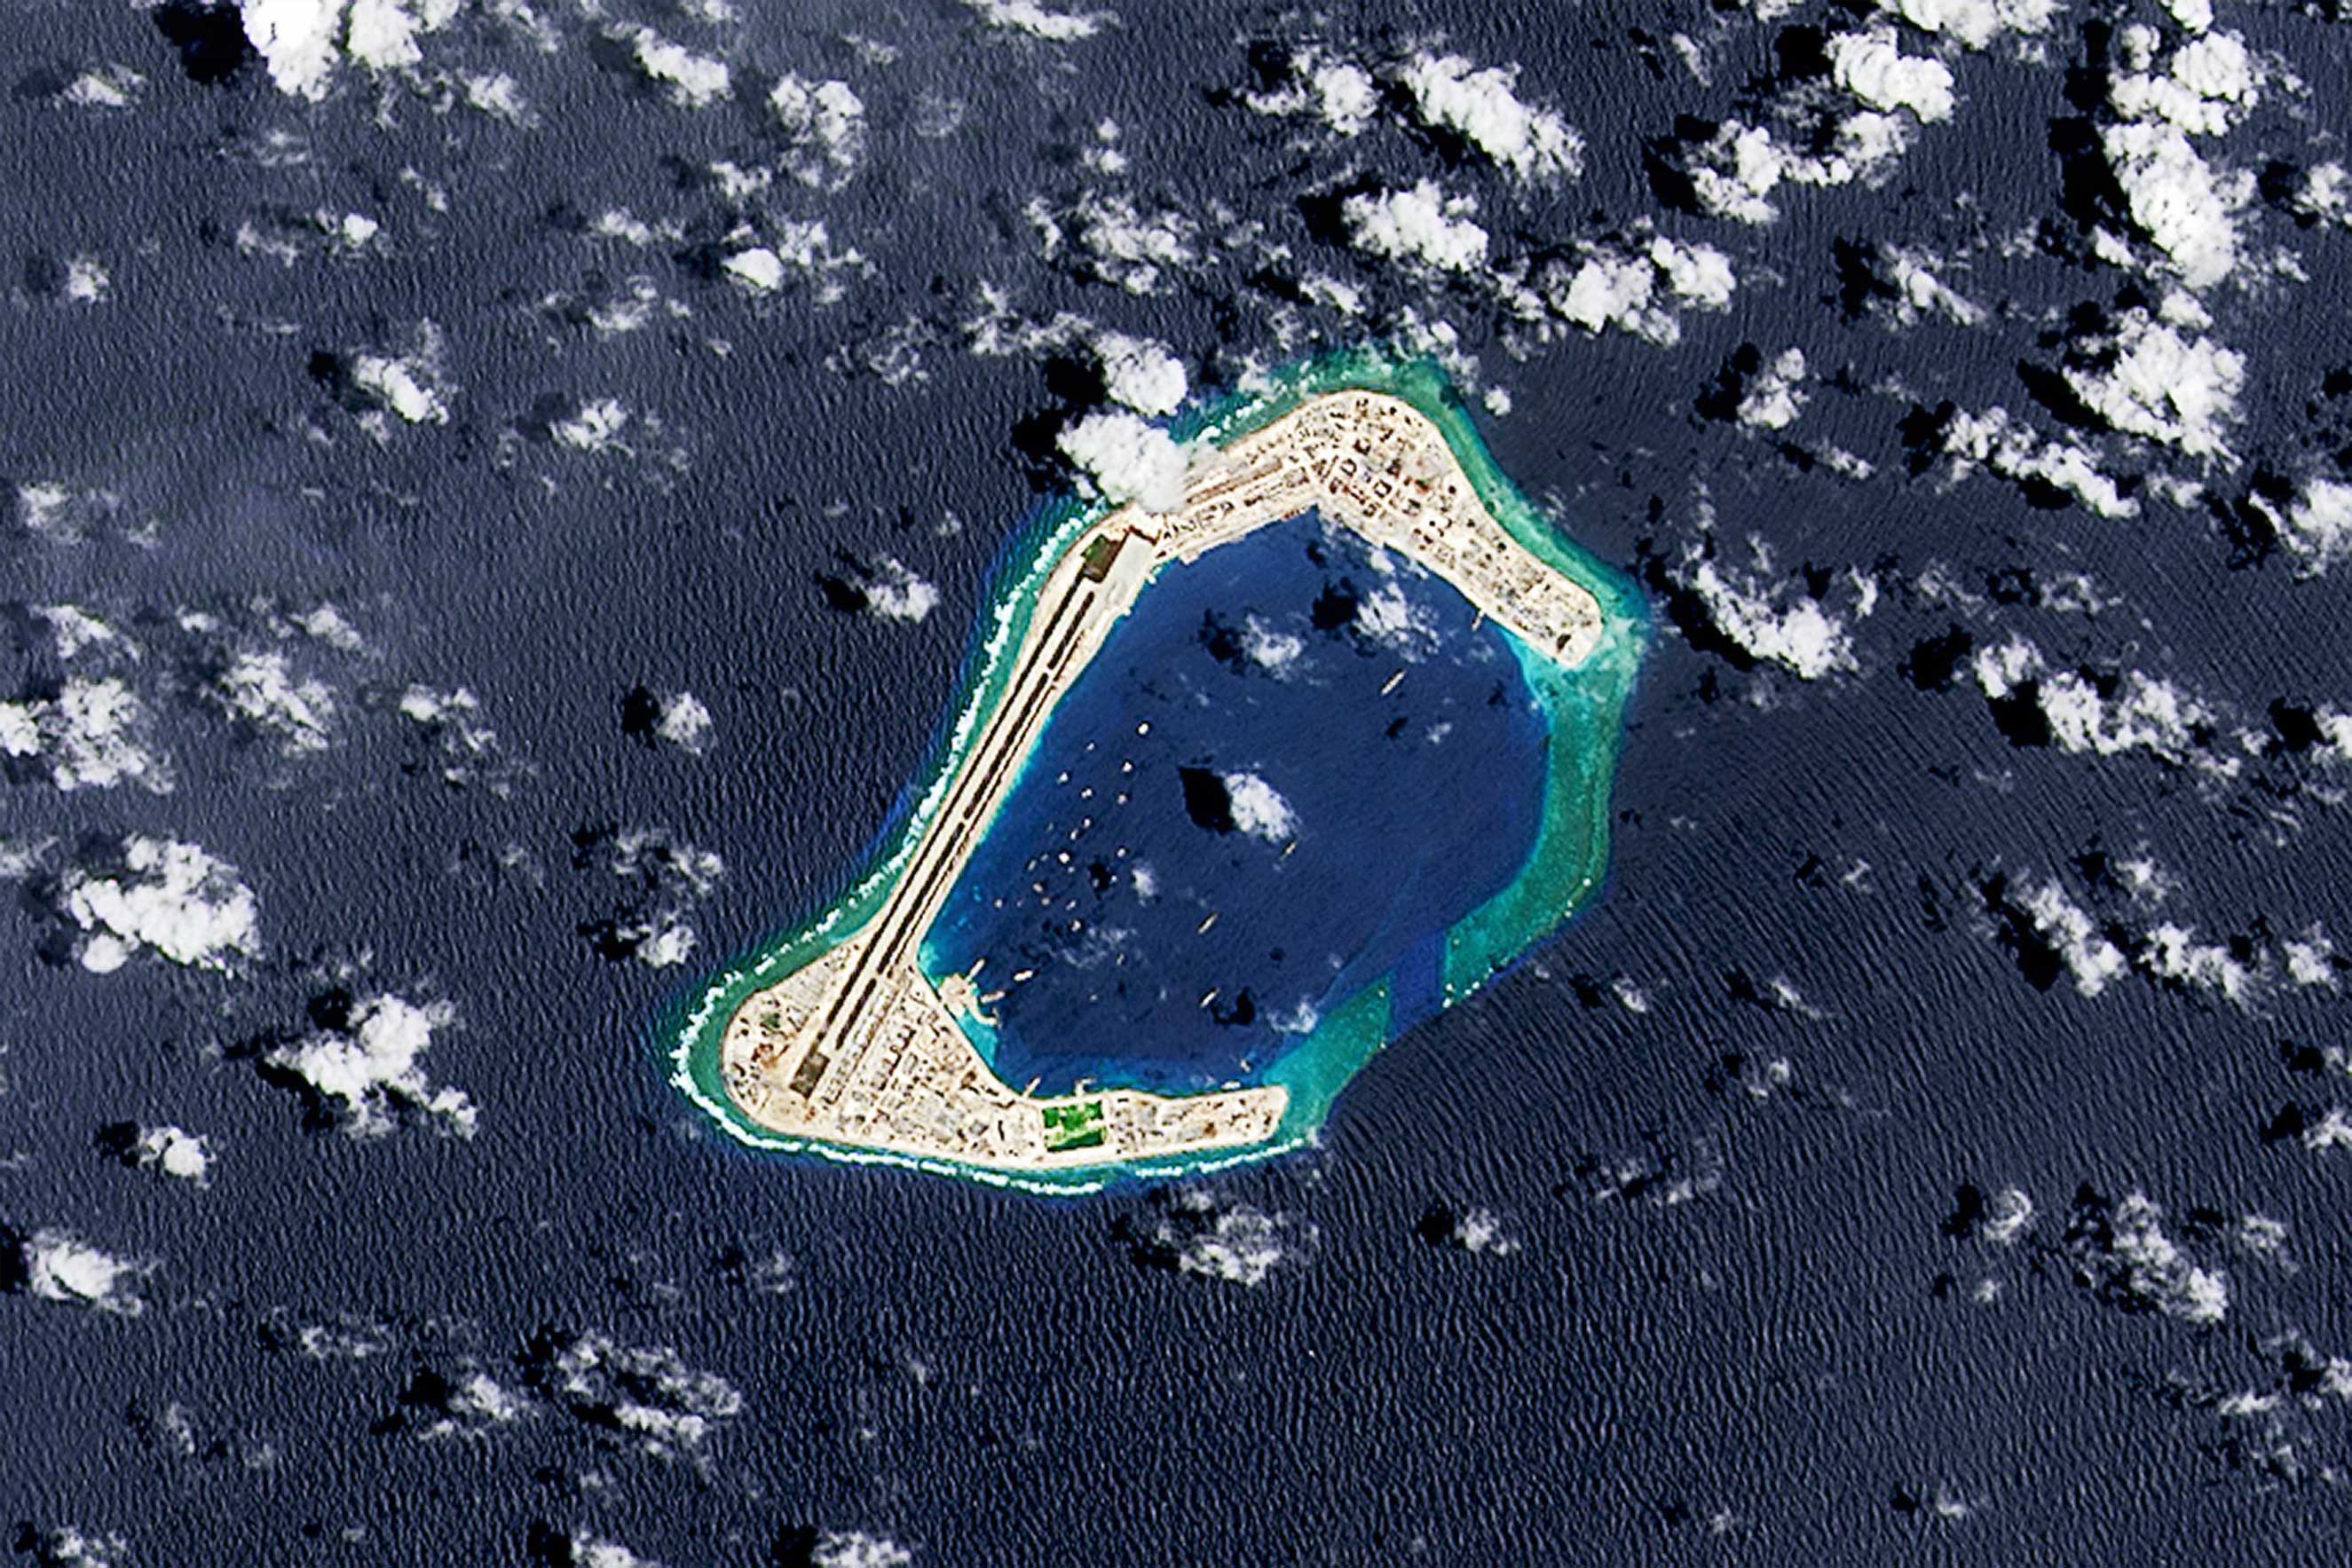 A satellite image of Subi Reef, where an artificial island is being developed by Beijing in the South China Sea. (NASA/Getty Images)